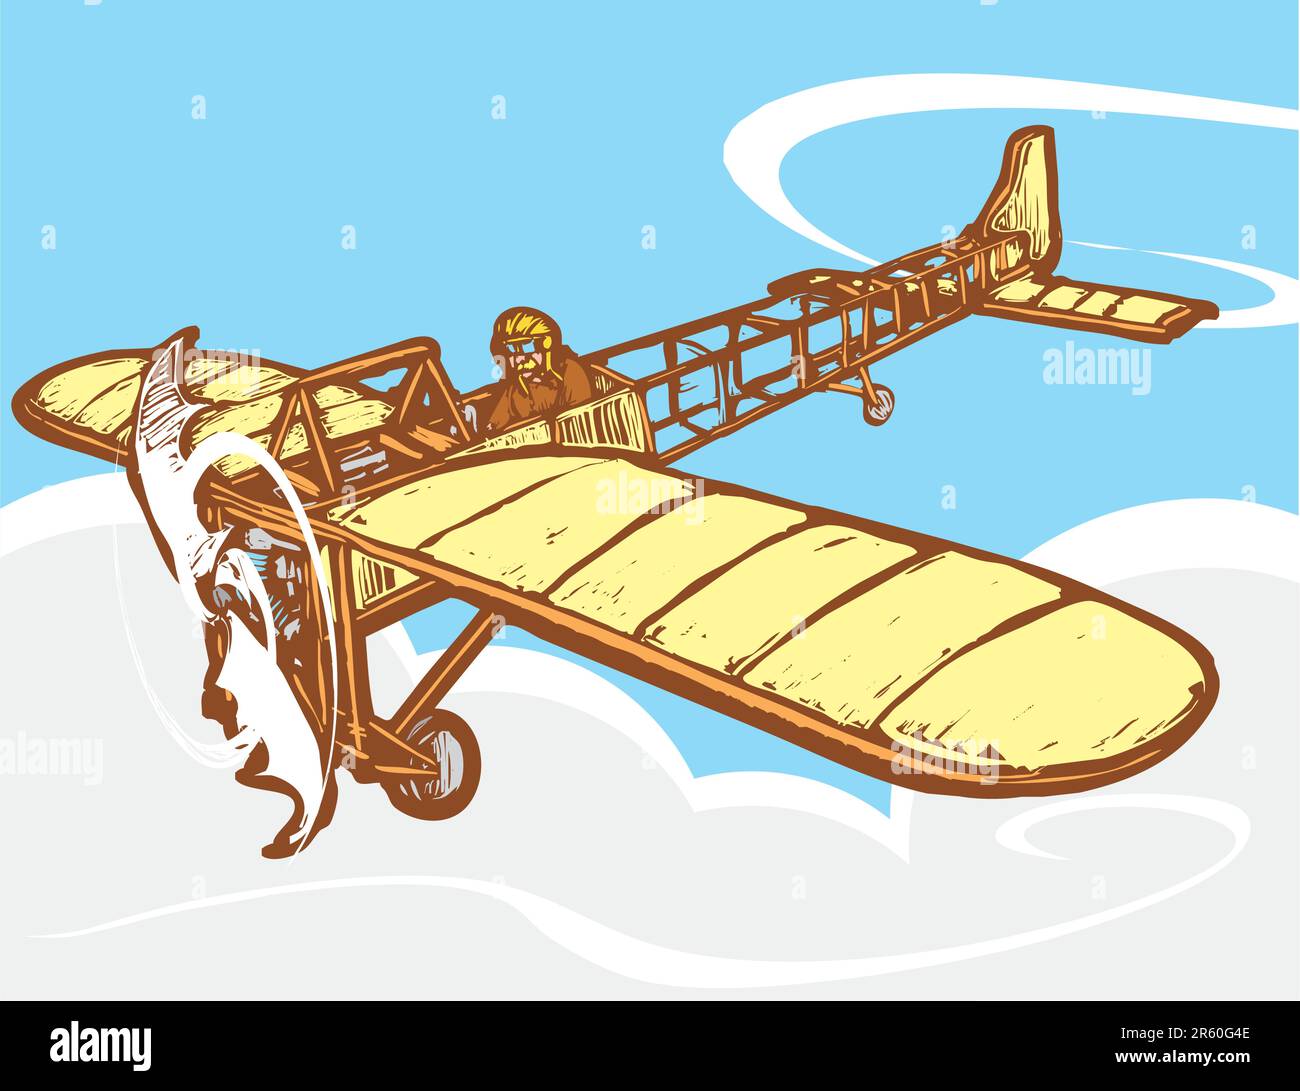 Early 20th century Bleriot airplane in flight. Stock Vector